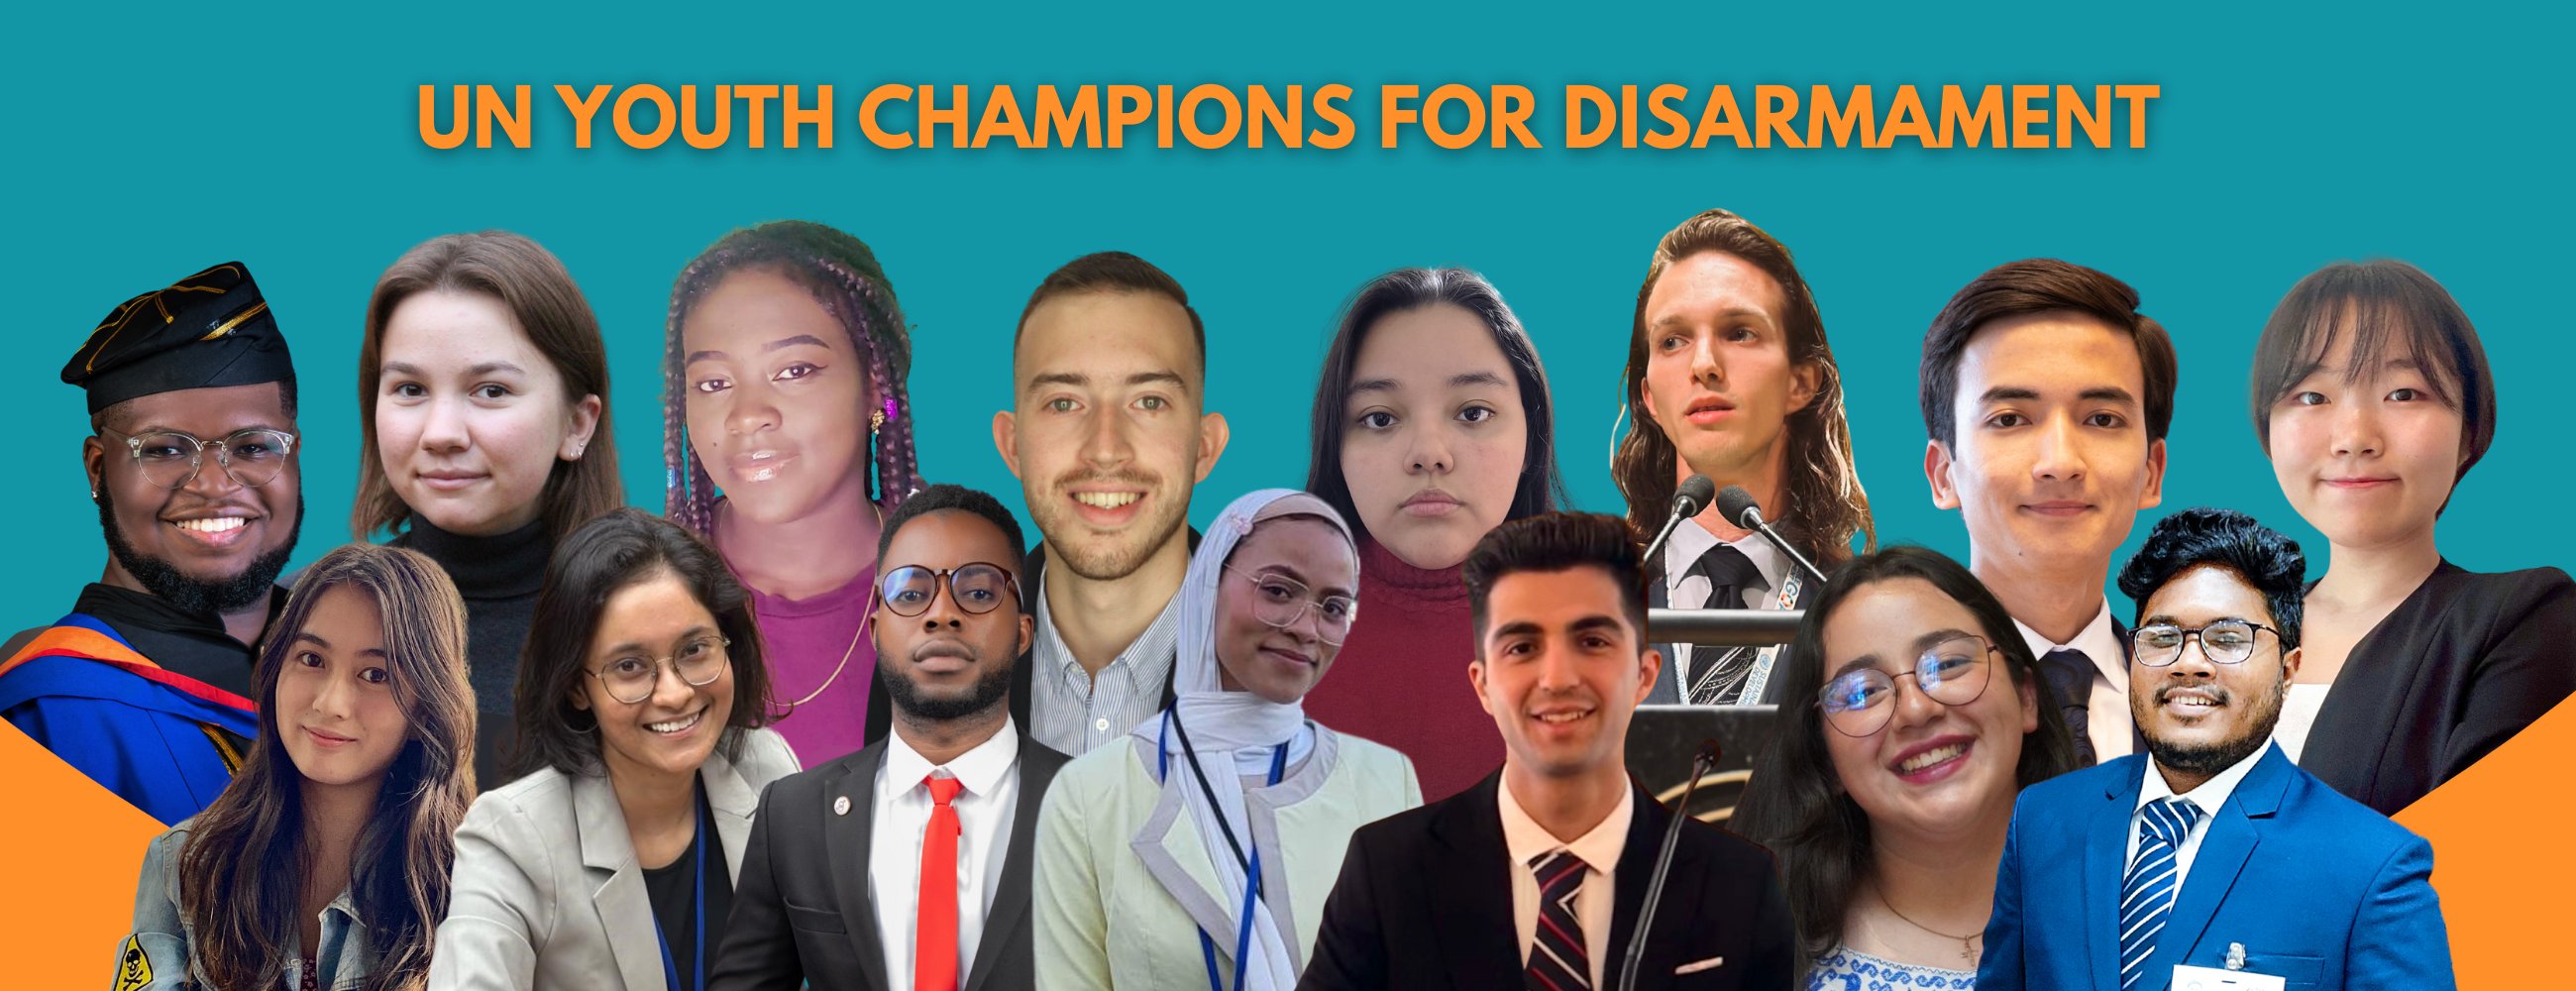 The United Nations Youth Champions for Disarmament